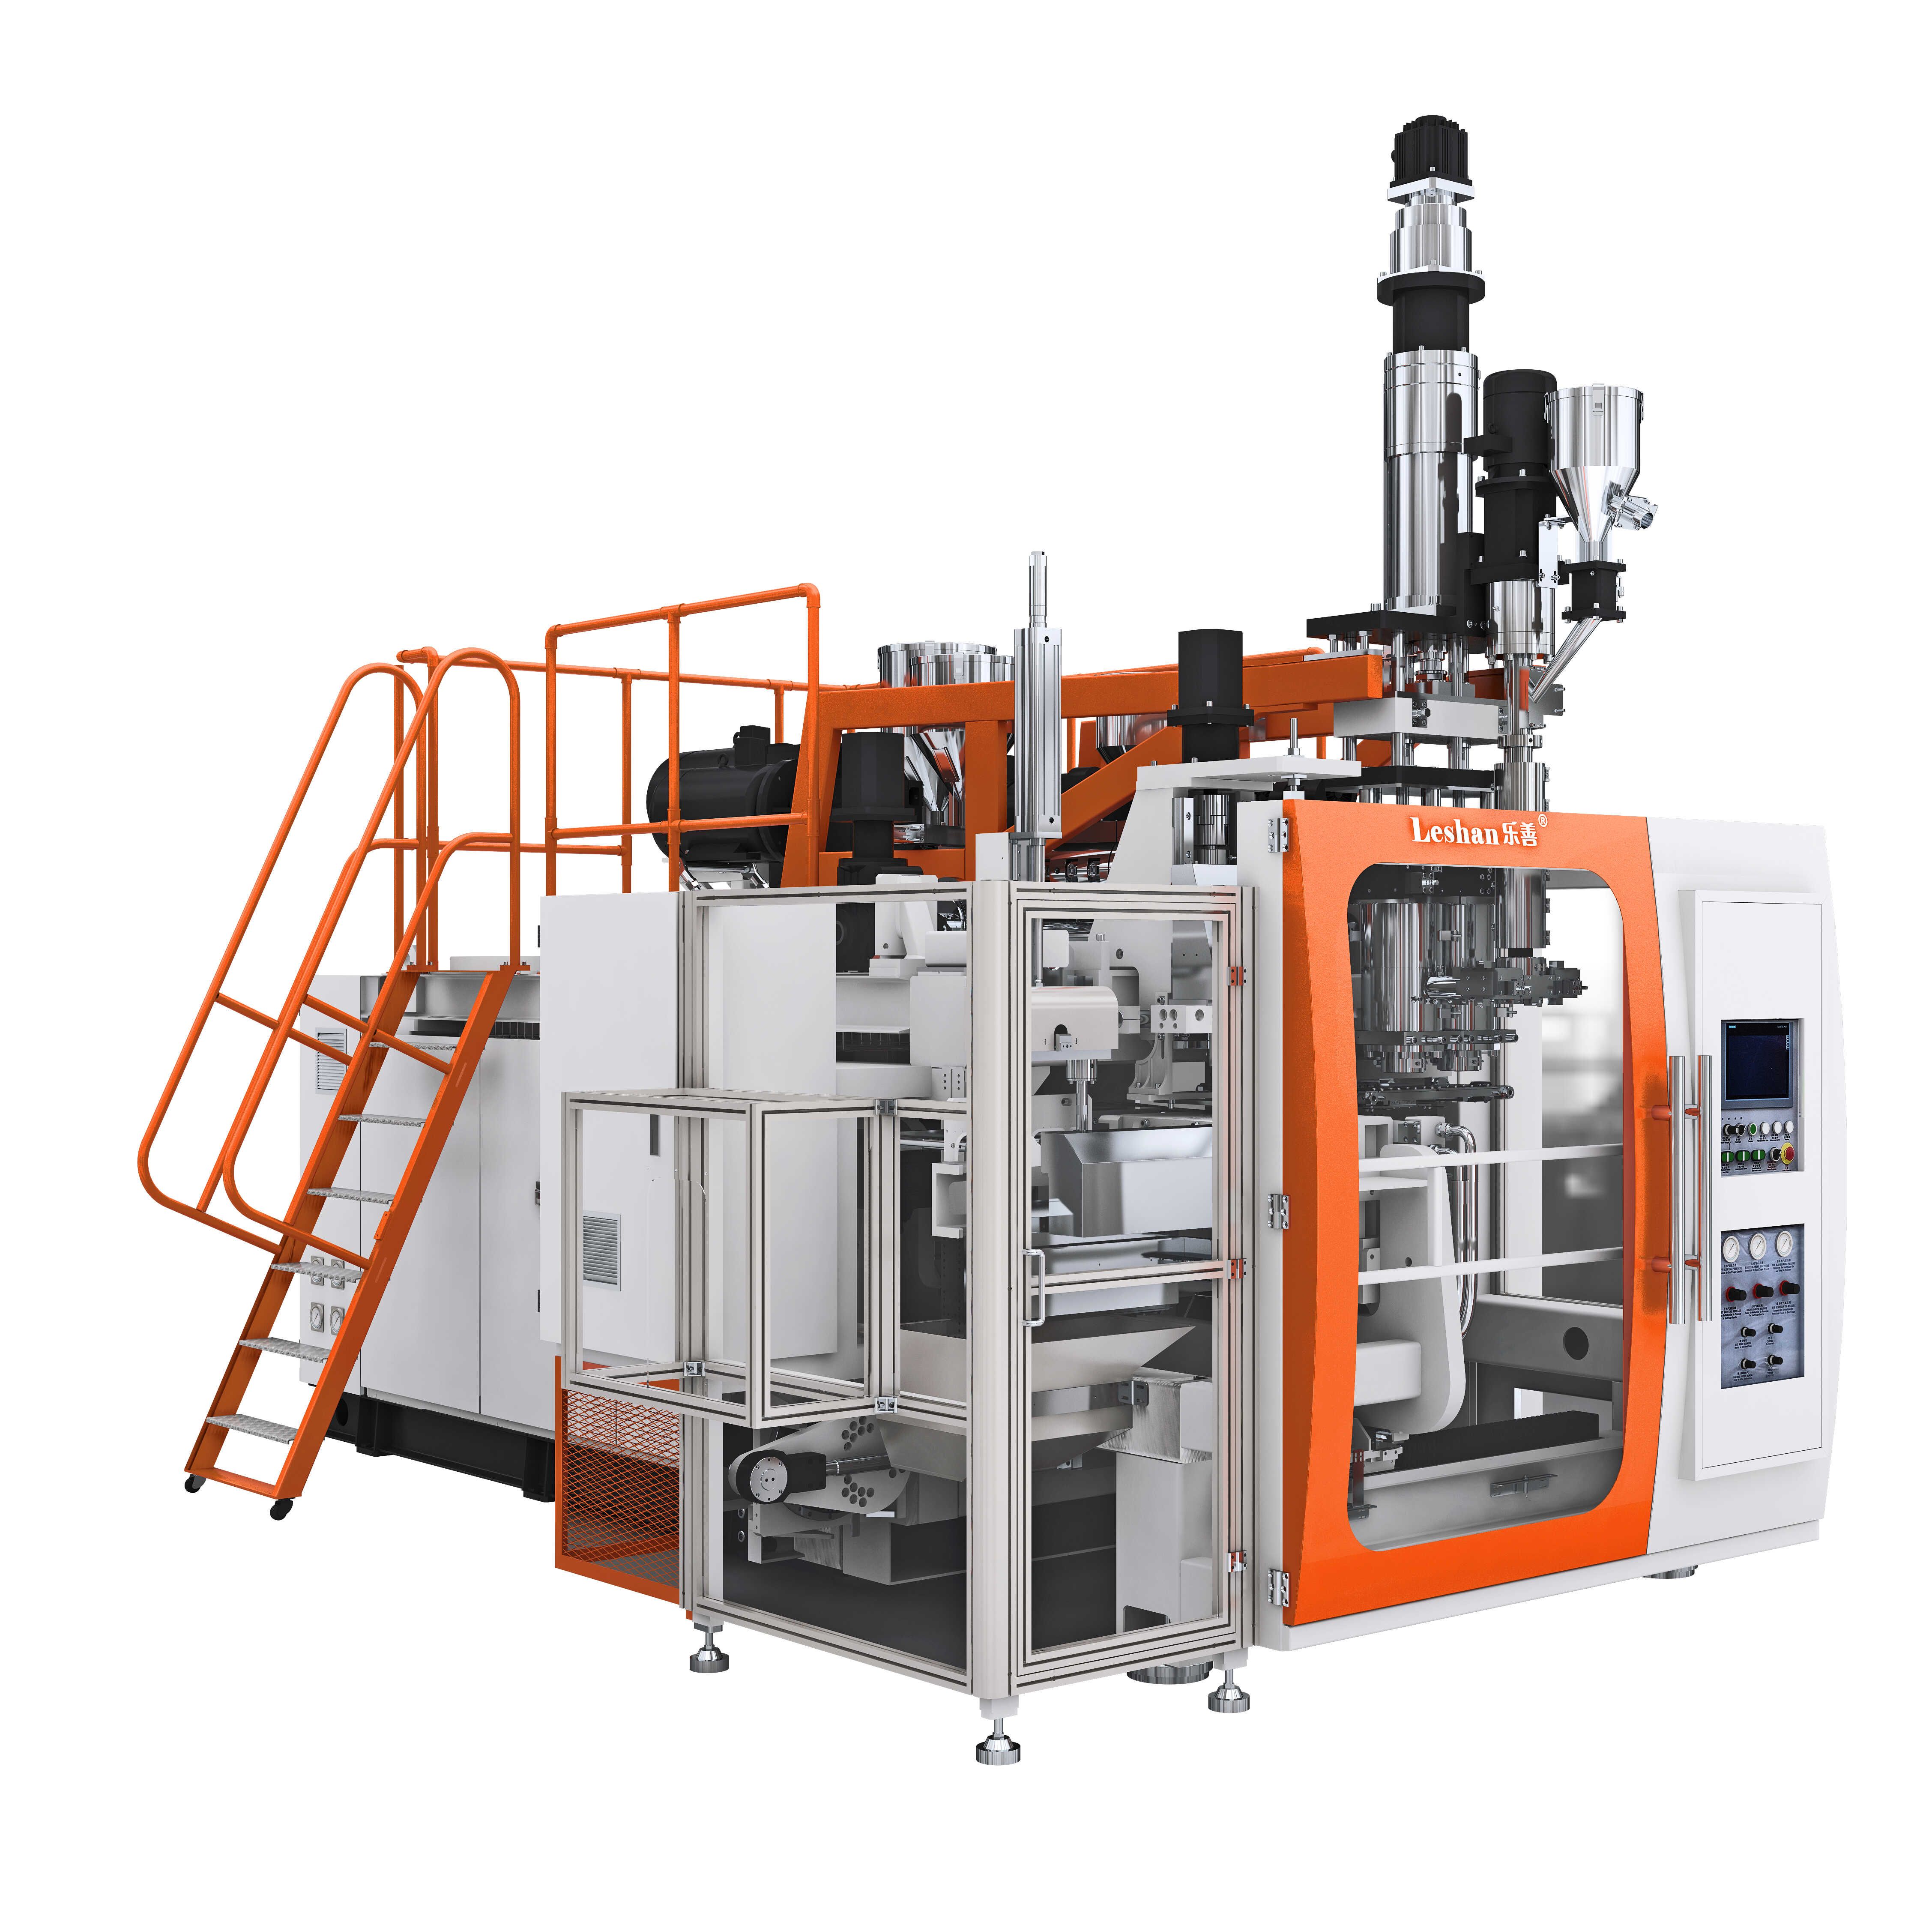 What are the safety standards for chlorox bottle extrusion blow molding?